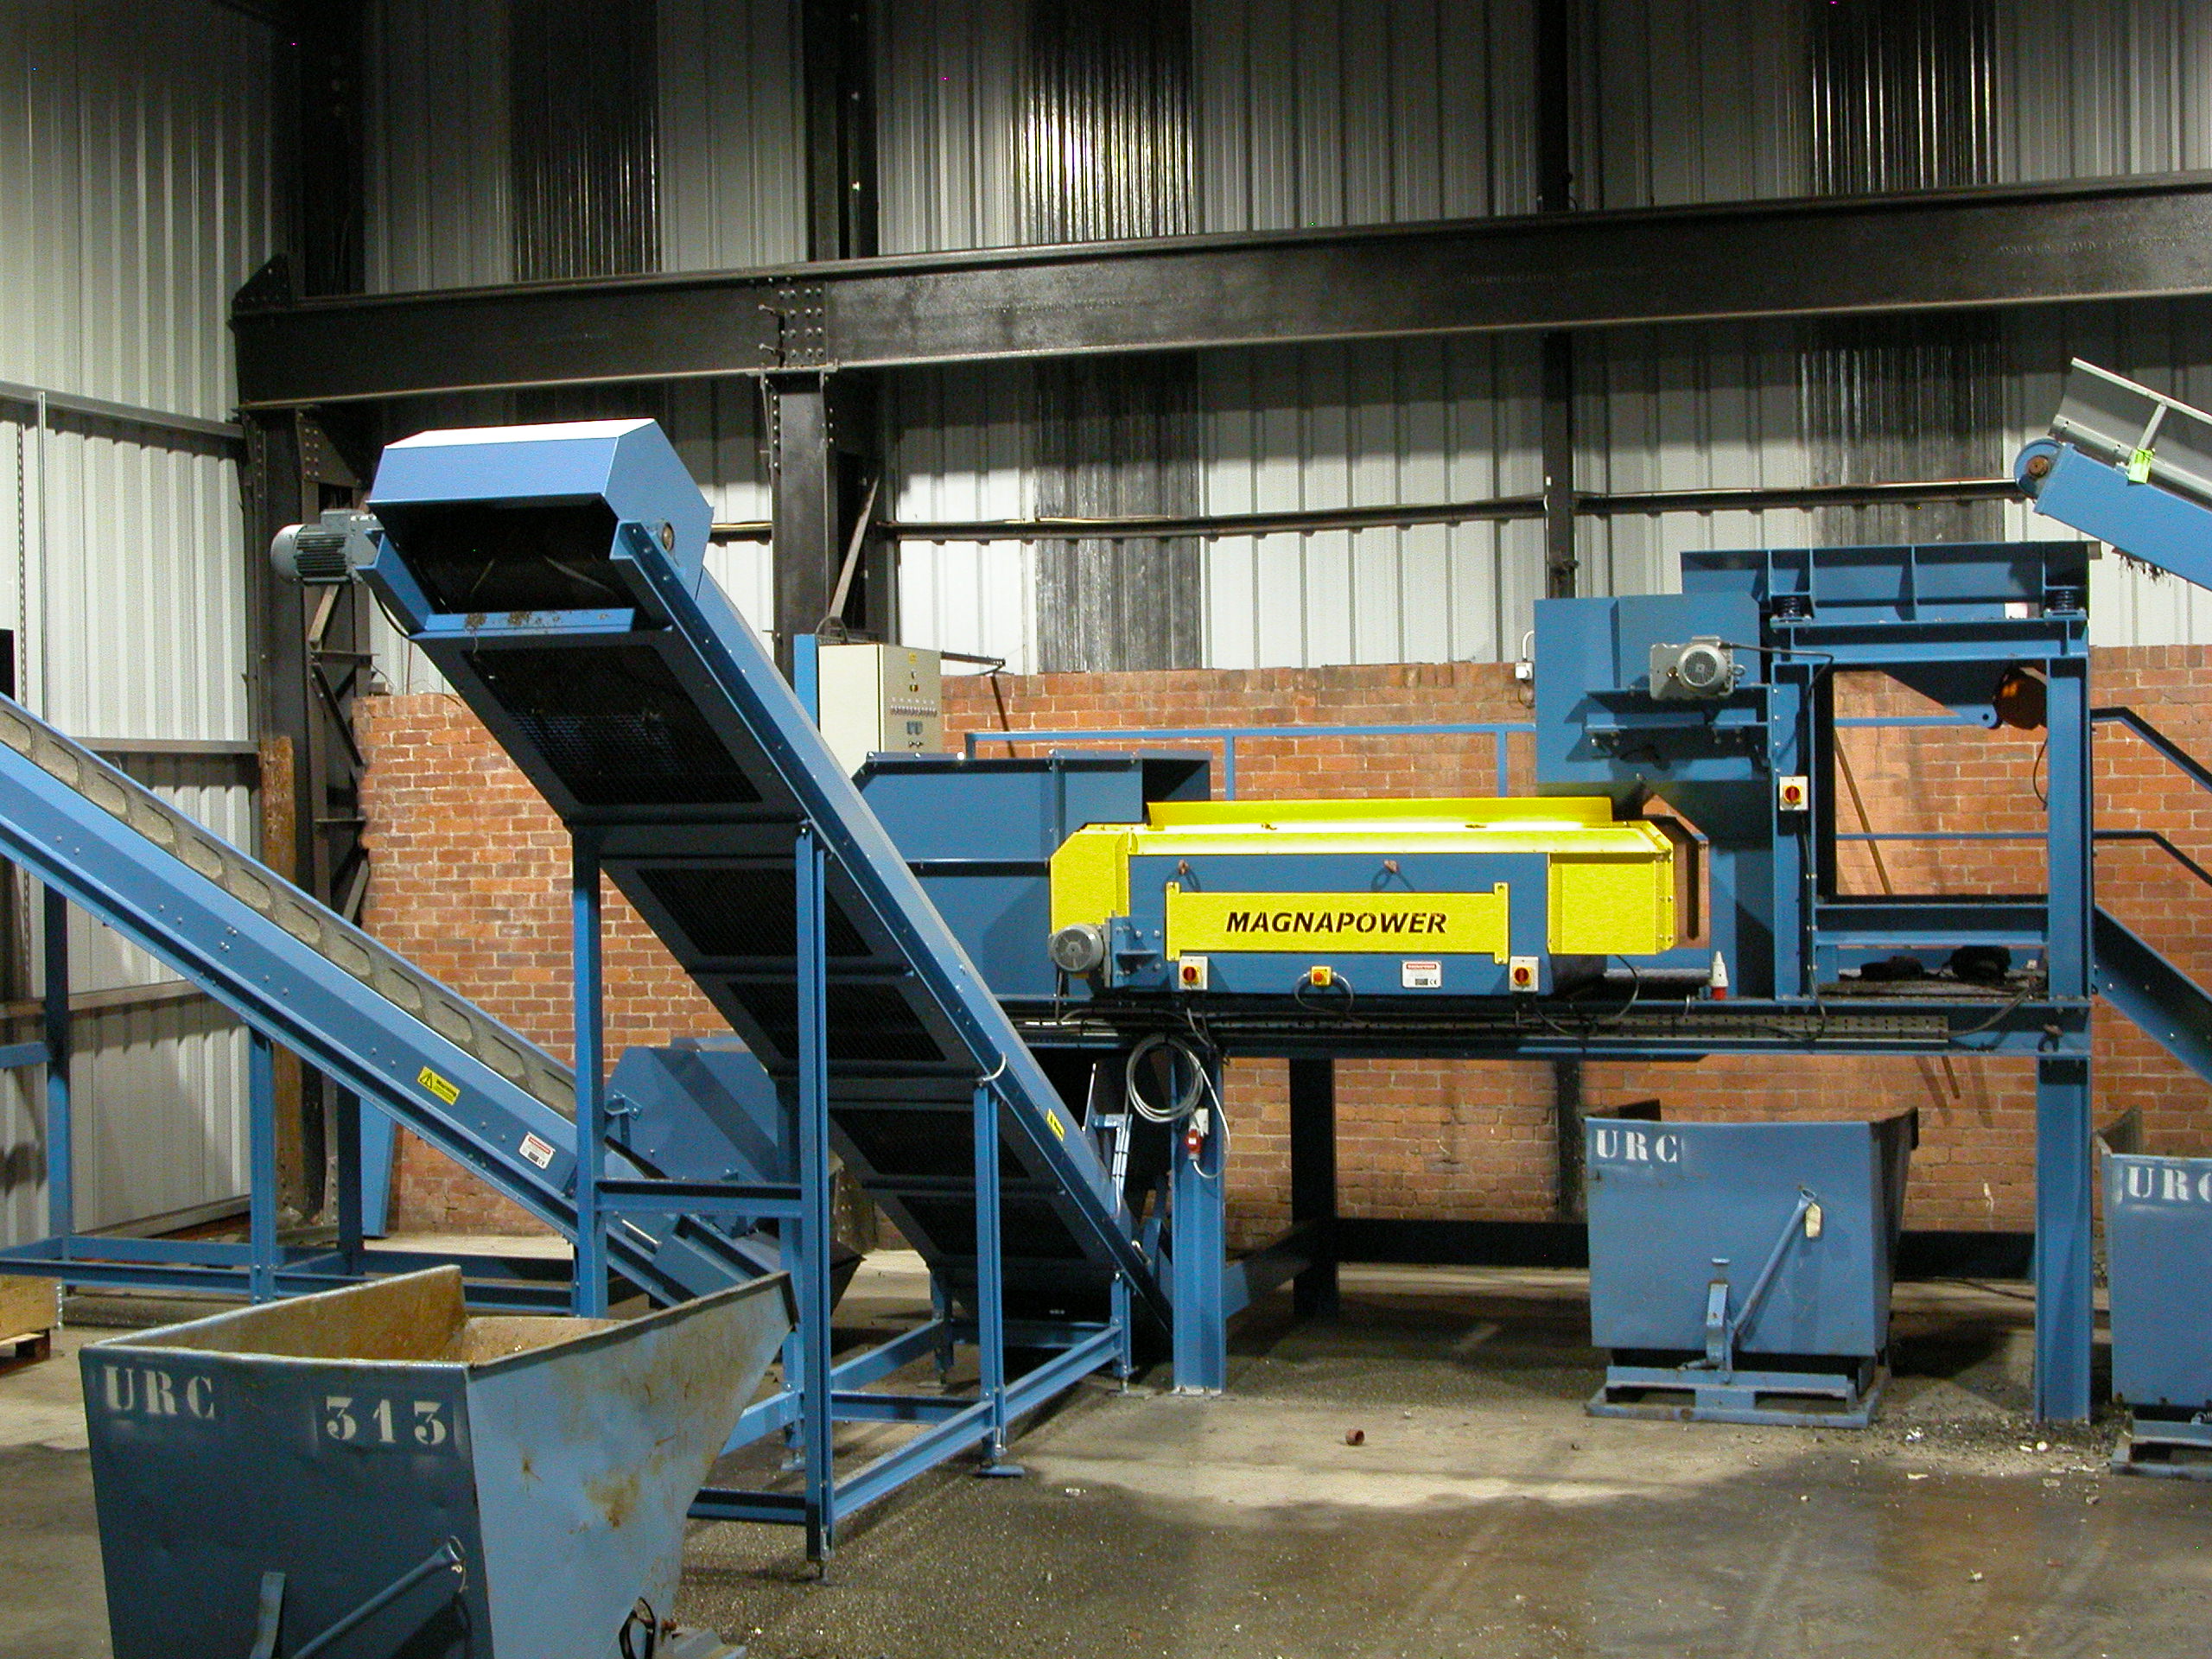 Drum magnet and eddy current separating metals from shredded electrical waste